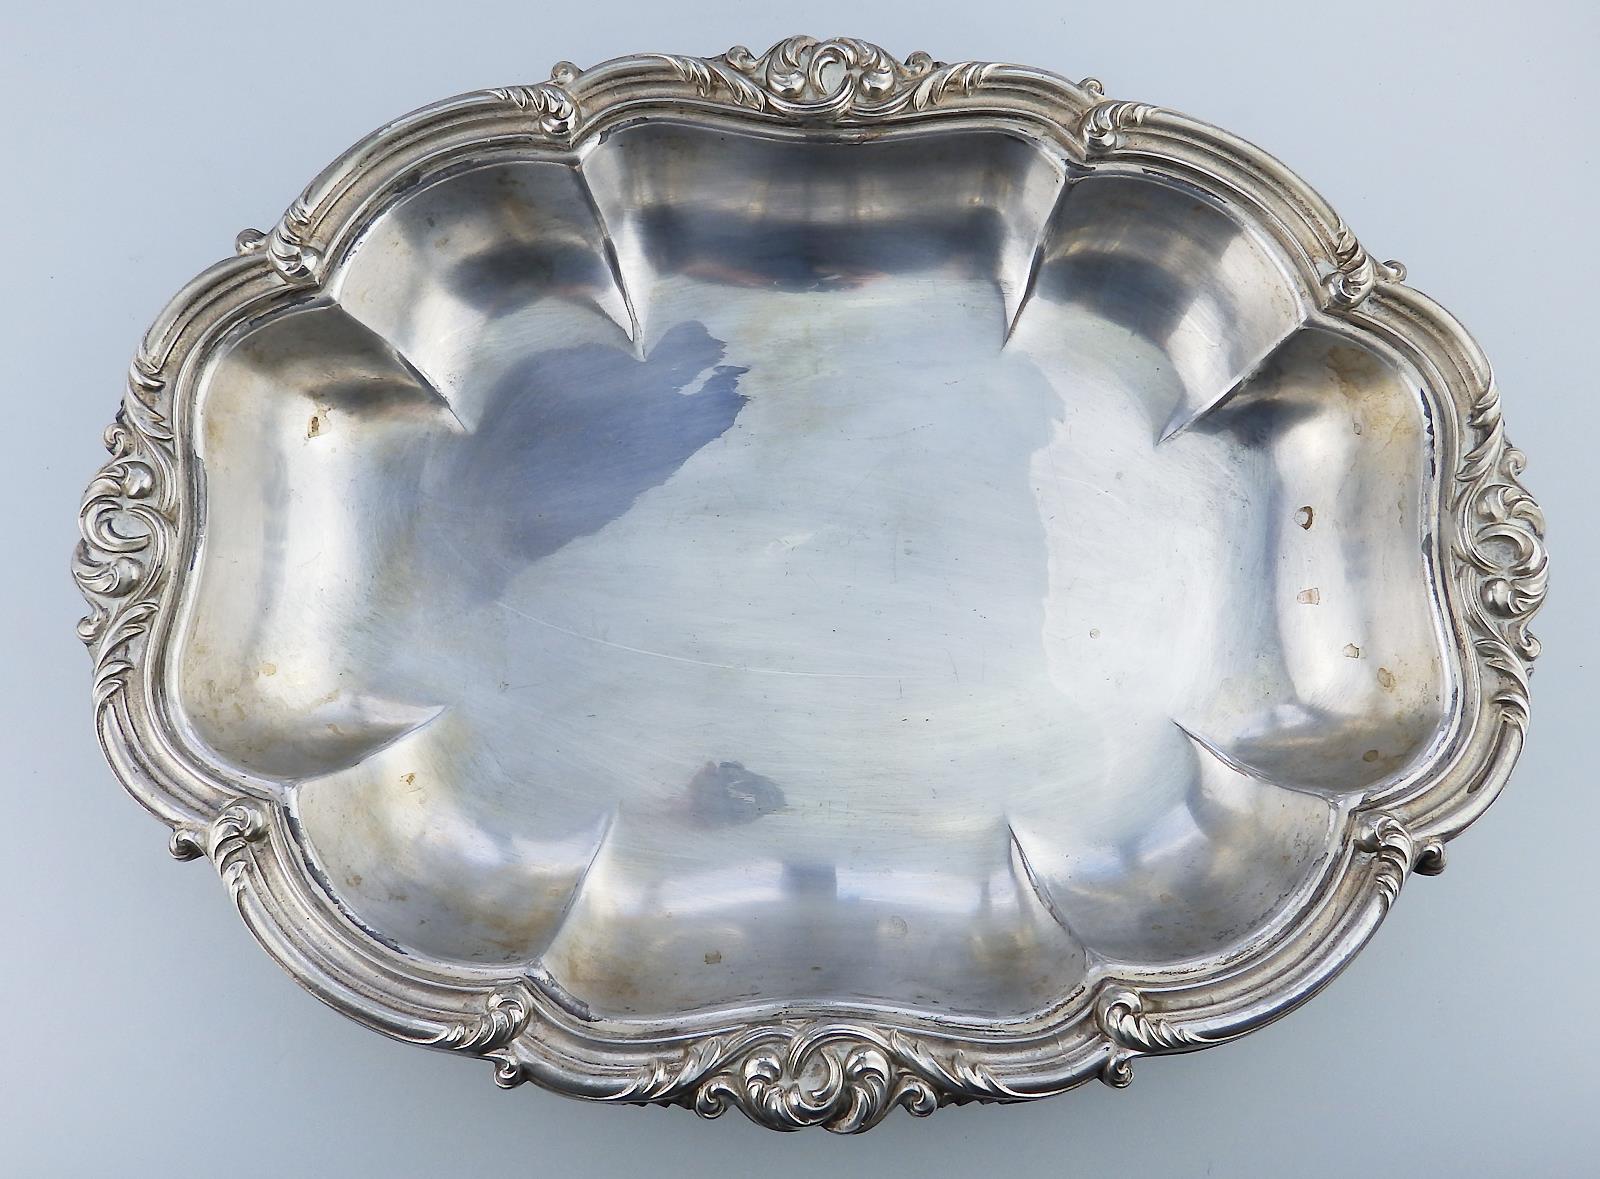 A Transition Period novelty Silver Plate Venison Dish 1840 - Image 8 of 15